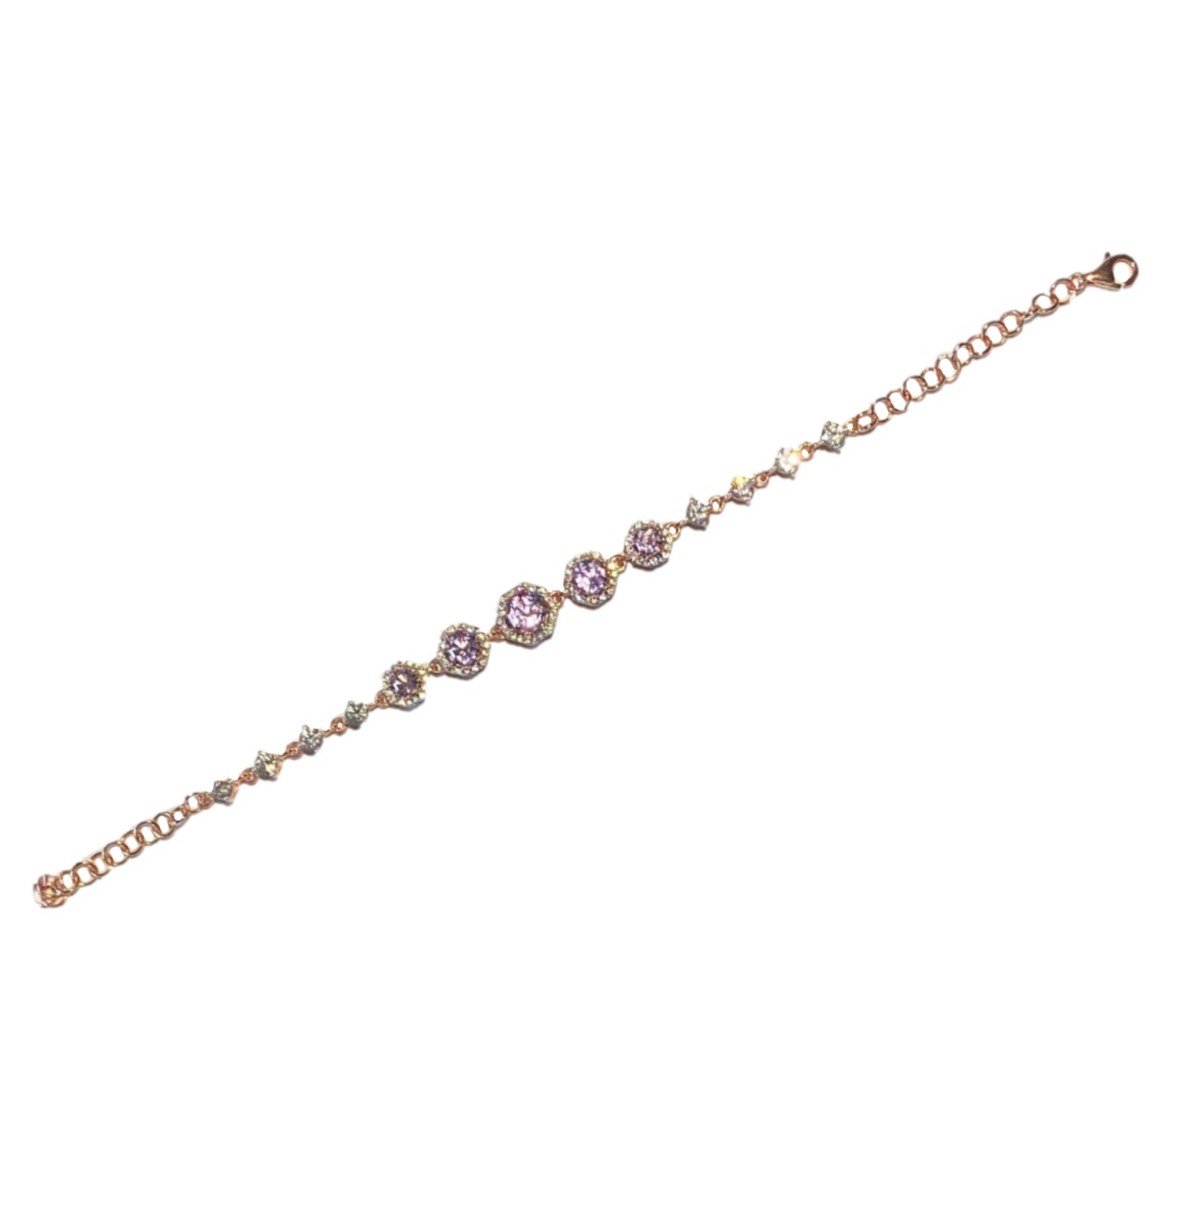 FARA Pink Amethyst with White Zircon Halo Link Bracelet, 18K Rose Gold plated Silver, Fine Jewelry for Women